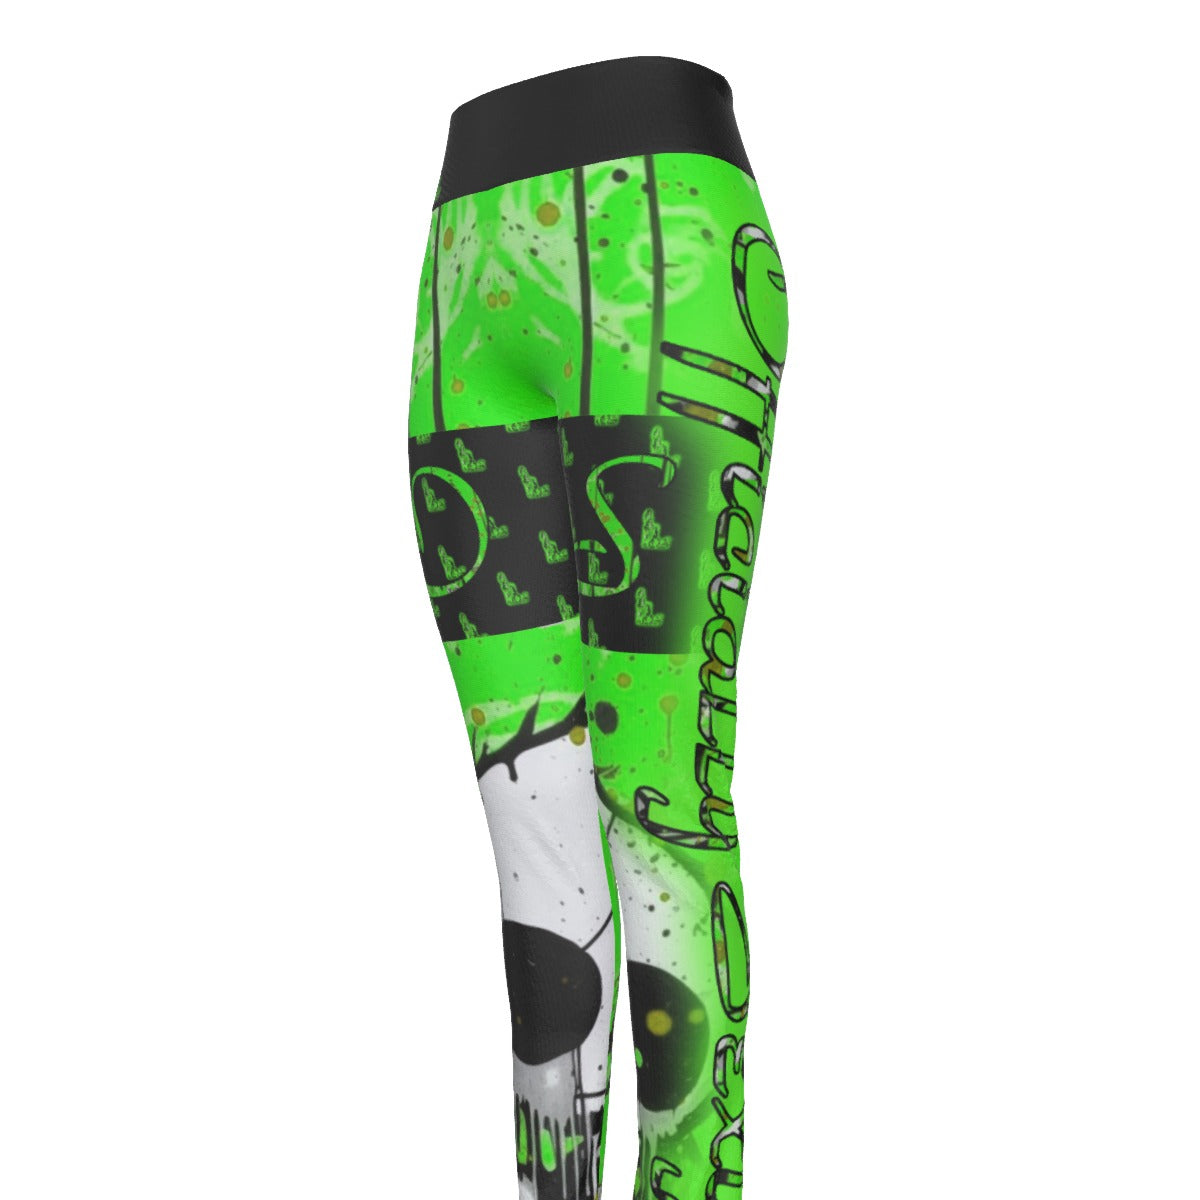 Officially Sexy Creepy Boy Officially Sexy Neon Green Women's High Waist Thigh High Booty Popper Leggings #2 With OS On Front And Back Thighs (English) 4